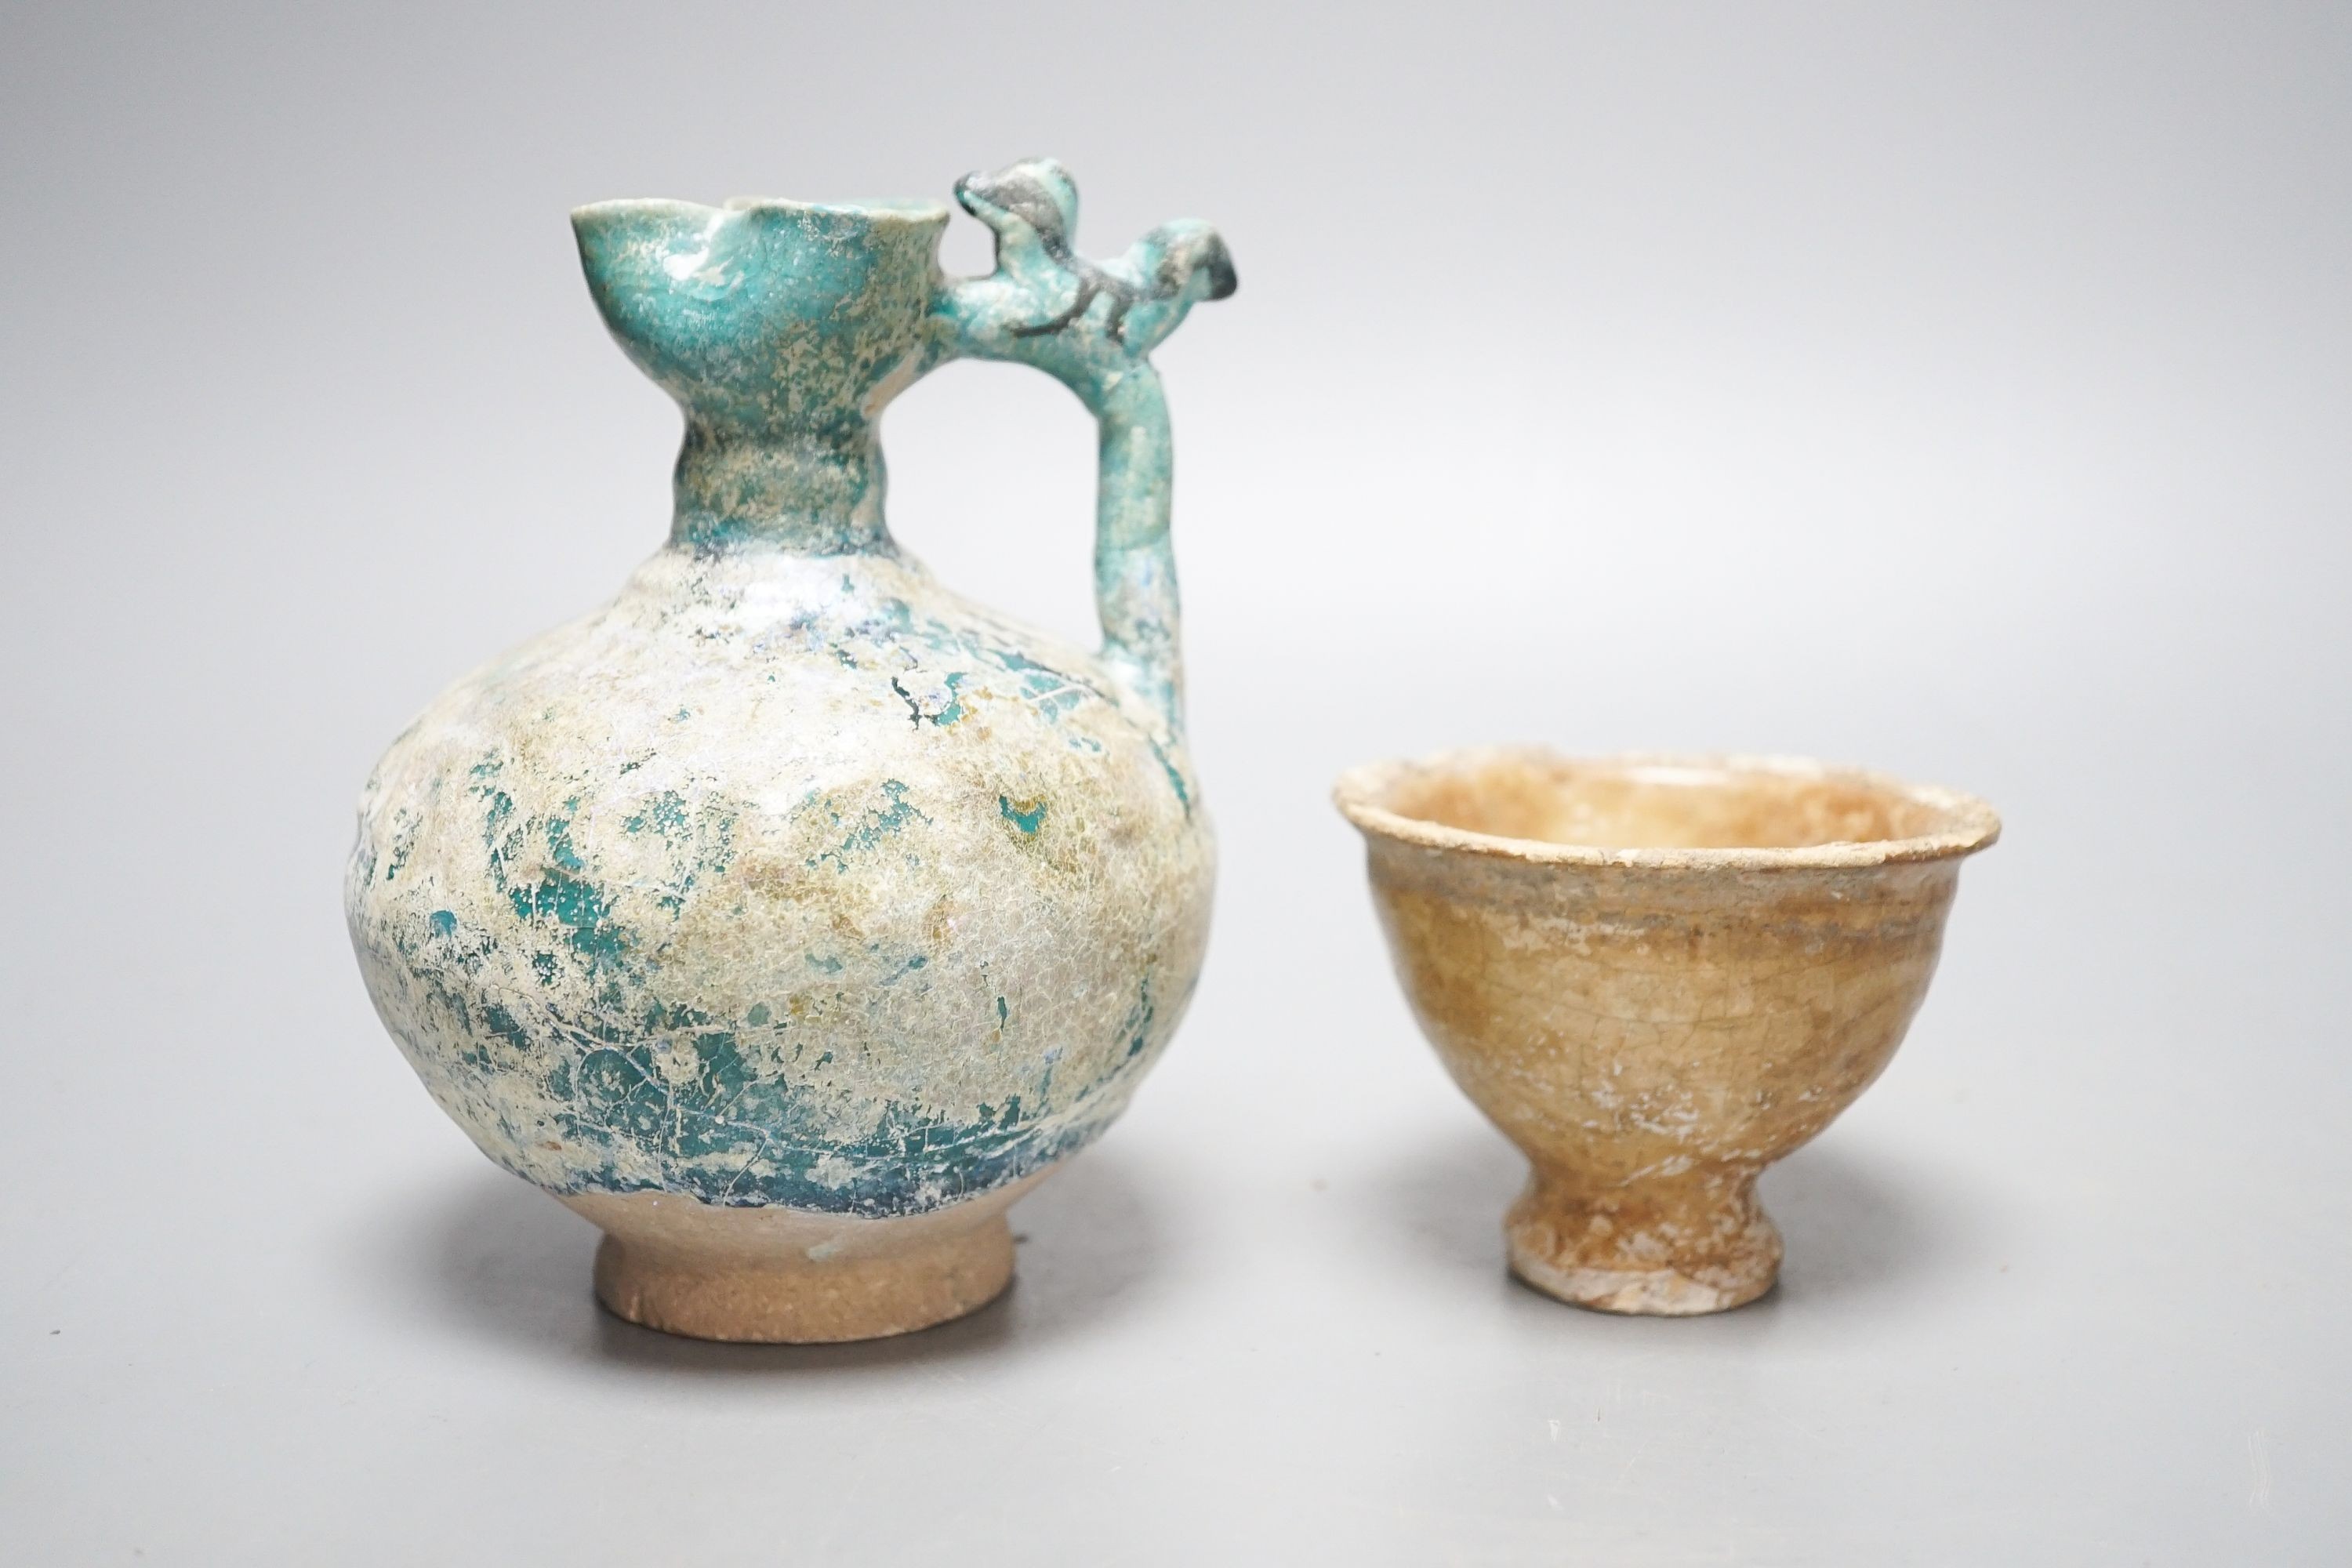 A Kashan turquoise glazed pottery ewer, 14th century, with mineral iridescence and an early Islamic pottery cup 14cm